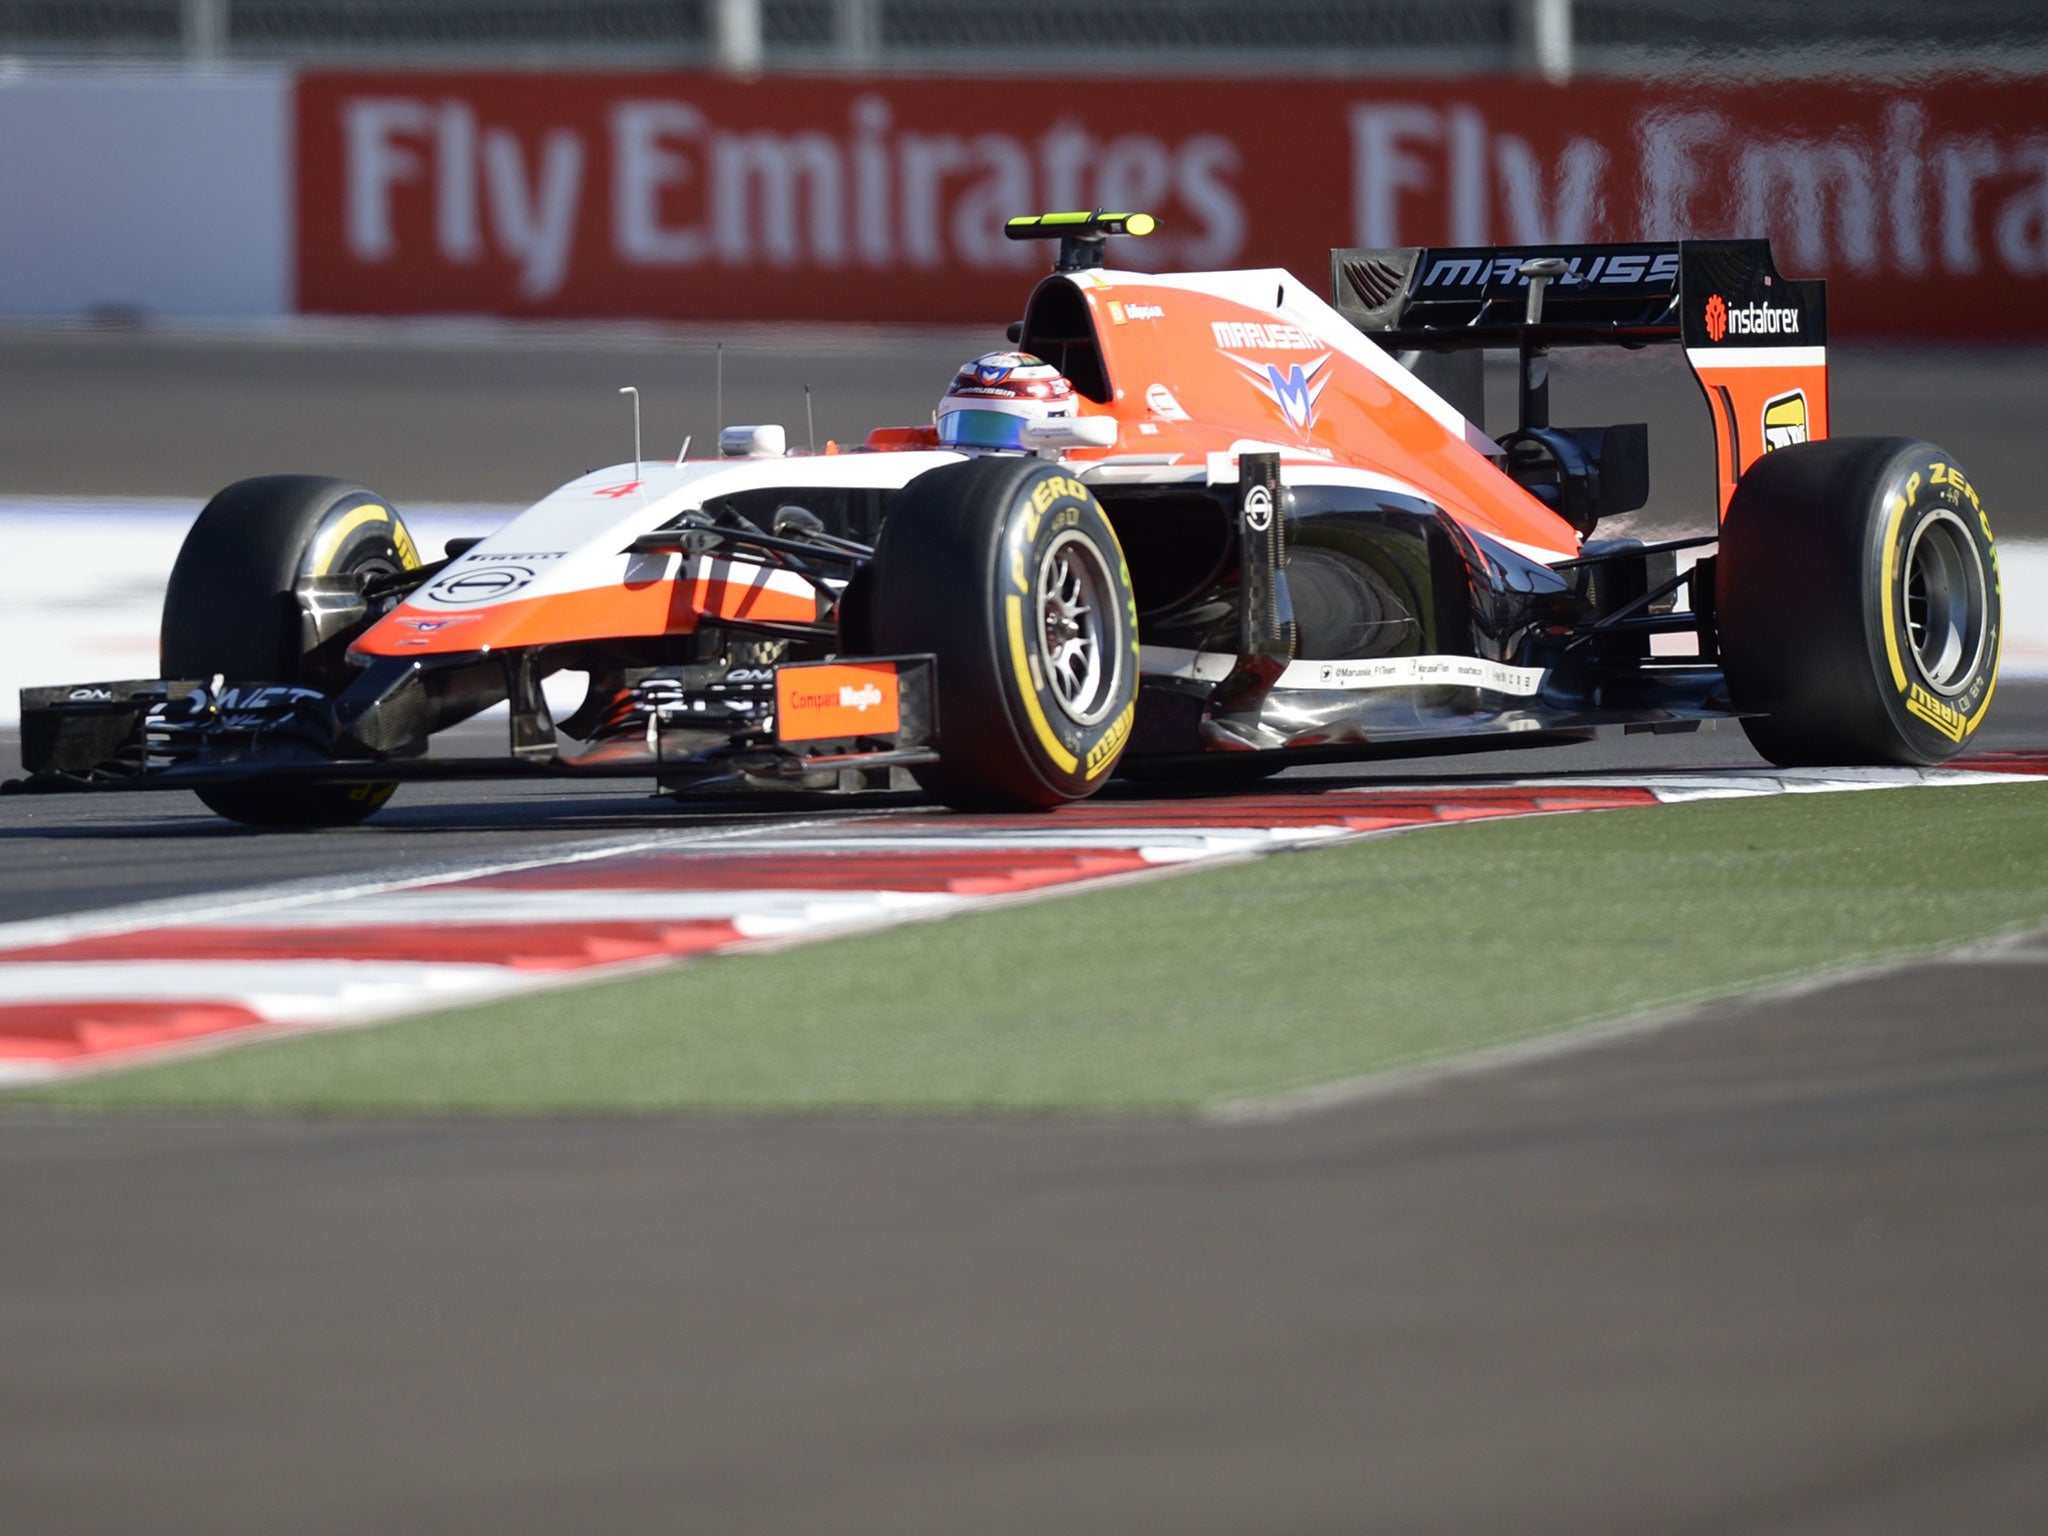 Marussia are among those struggling